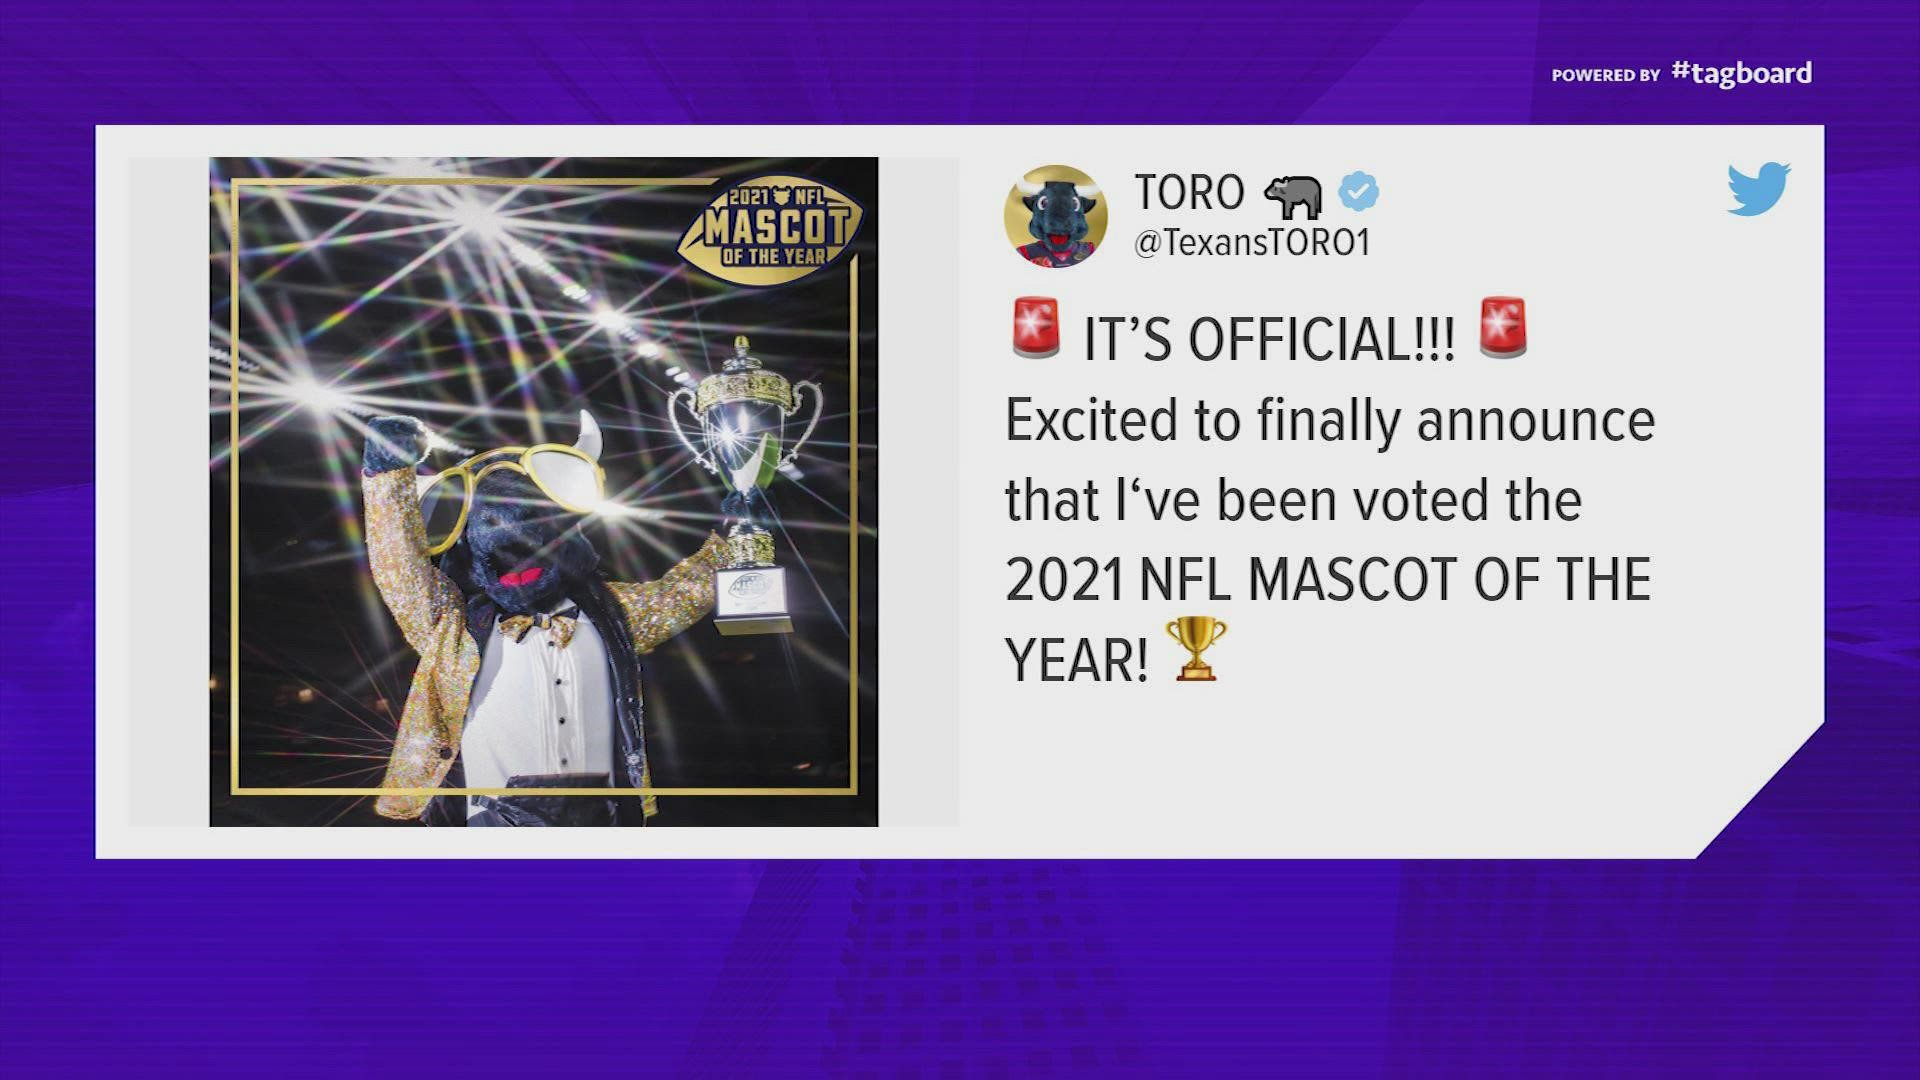 The Houston Texans' mascot Toro was named NFL's ascot of the Year for 2021.